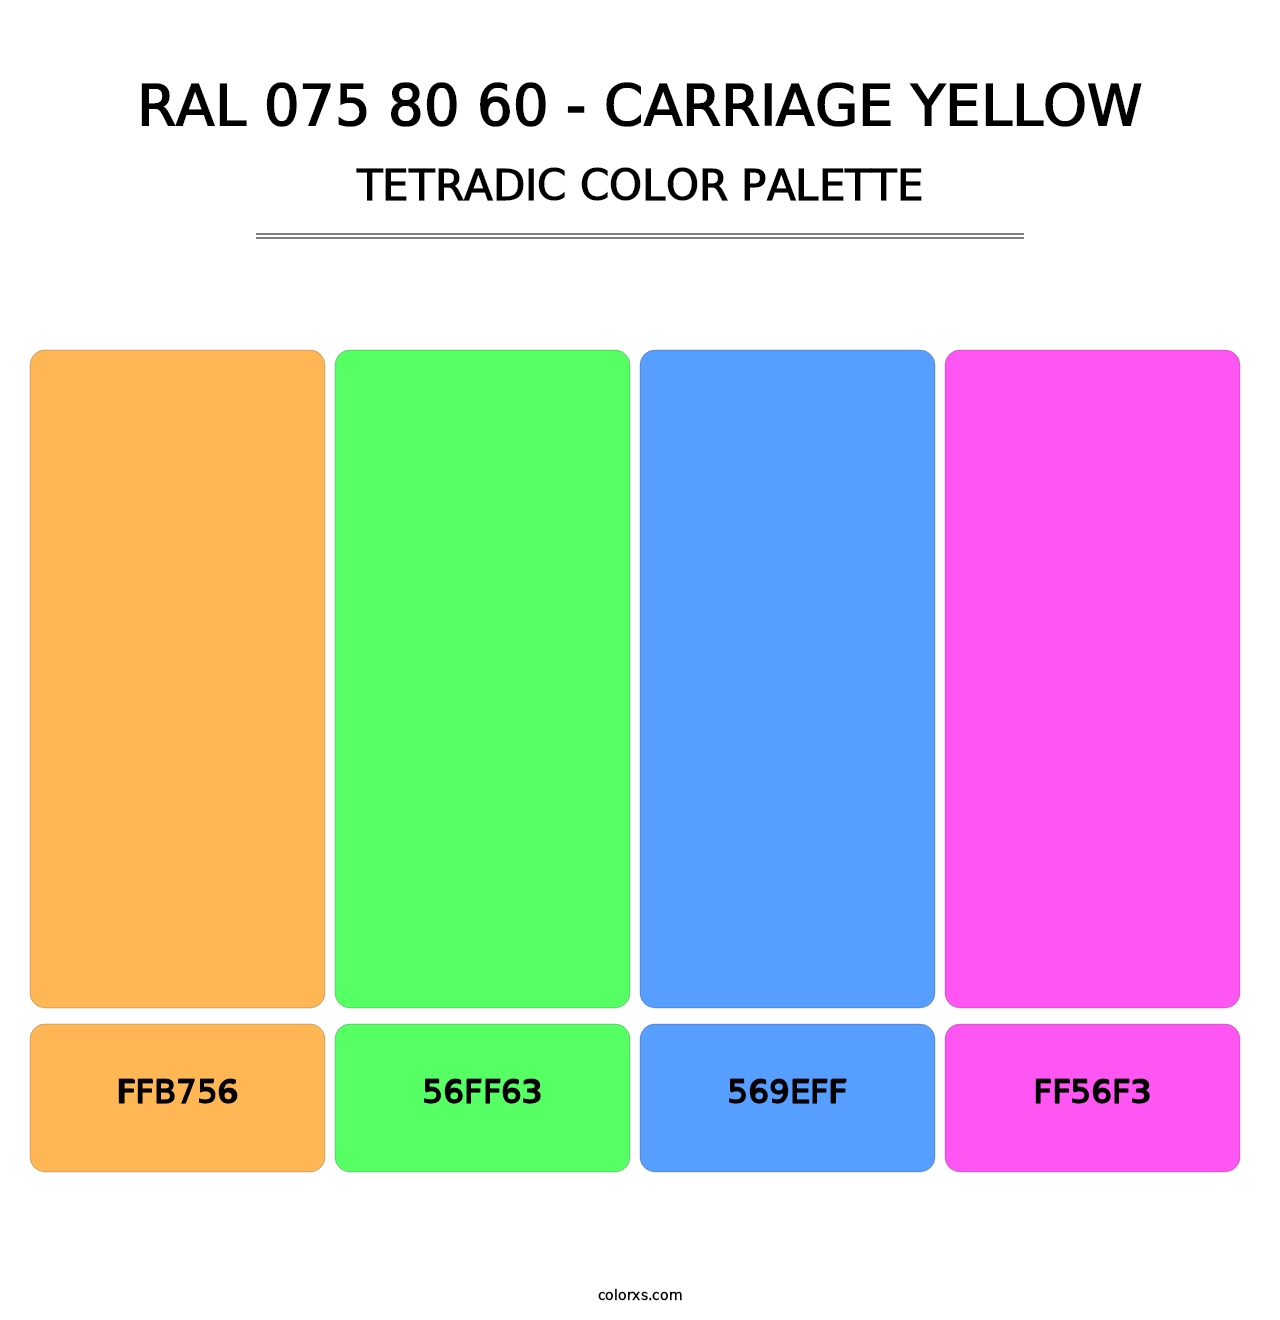 RAL 075 80 60 - Carriage Yellow - Tetradic Color Palette